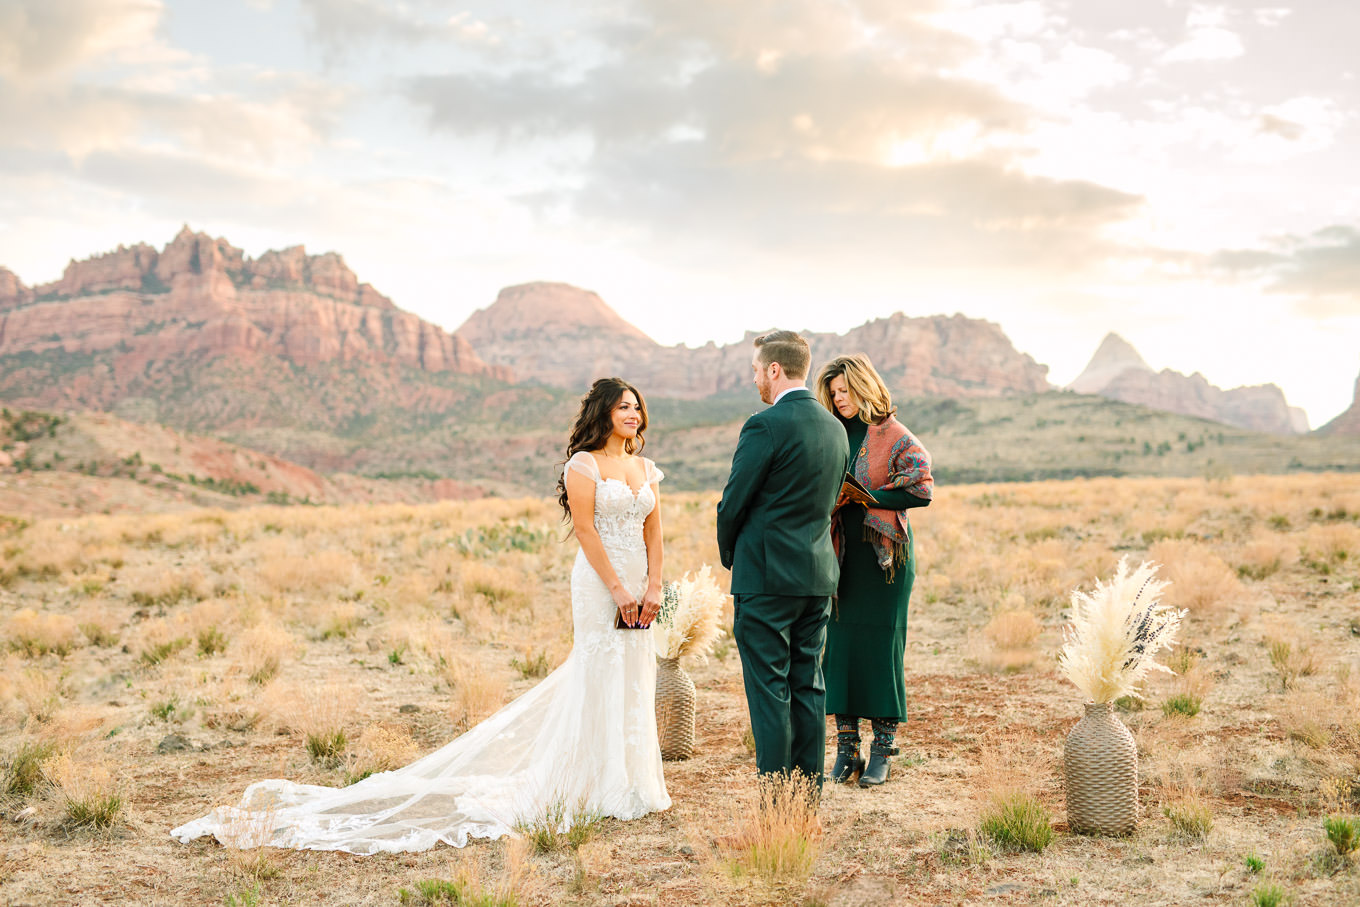 Open field mountain ceremony | Zion Under Canvas camping elopement at sunrise | Colorful elopement photography | #utahelopement #zionelopement #zionwedding #undercanvaszion #sunriseelopement #adventureelopement  Source: Mary Costa Photography | Los Angeles